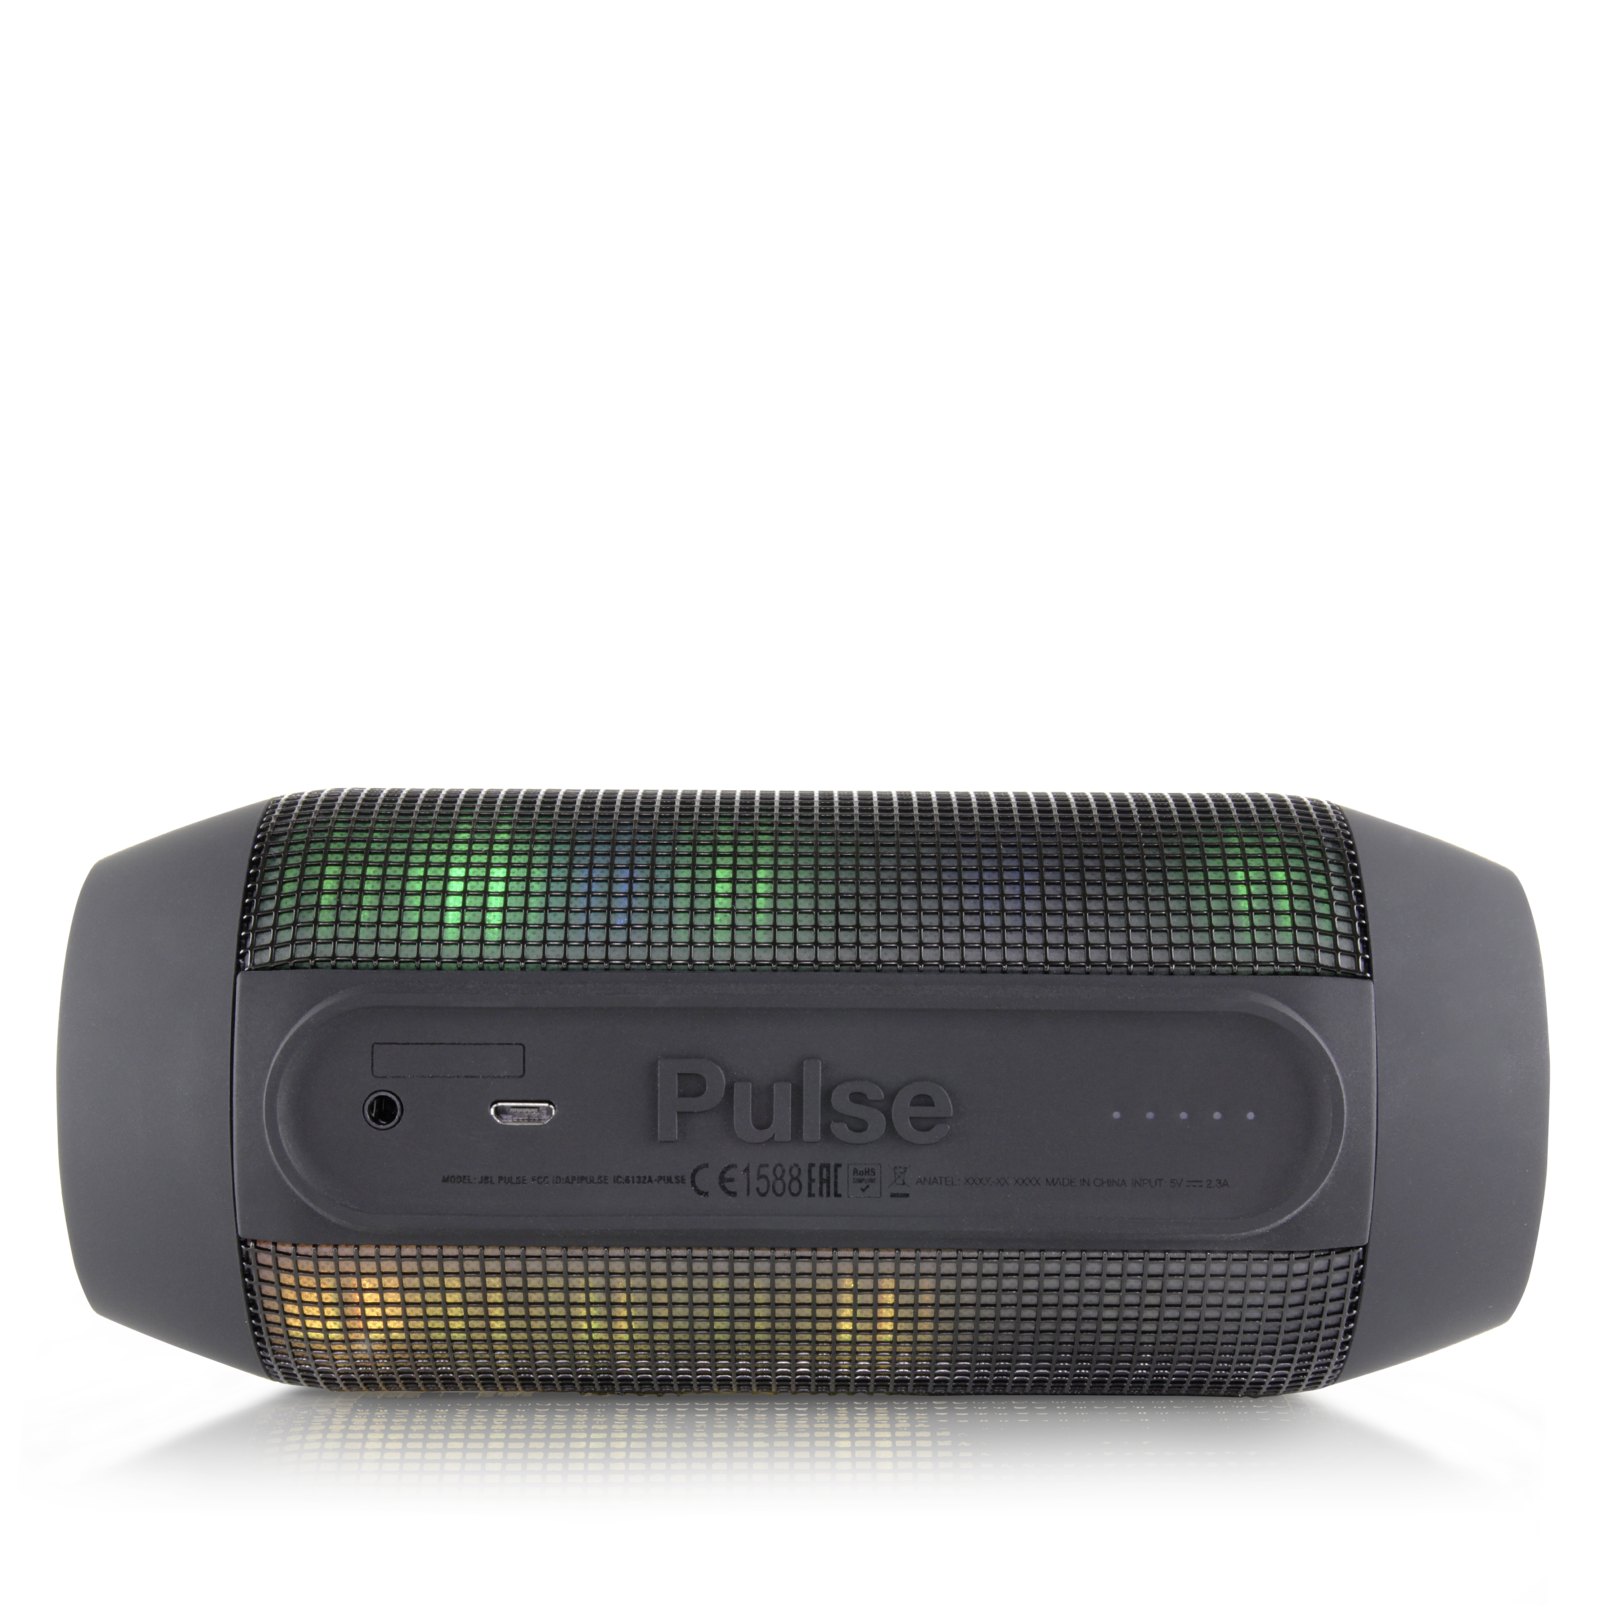 JBL Pulse - Black - Wireless speaker with 10-hour battery, Bluetooth and custom LED light show. - Back